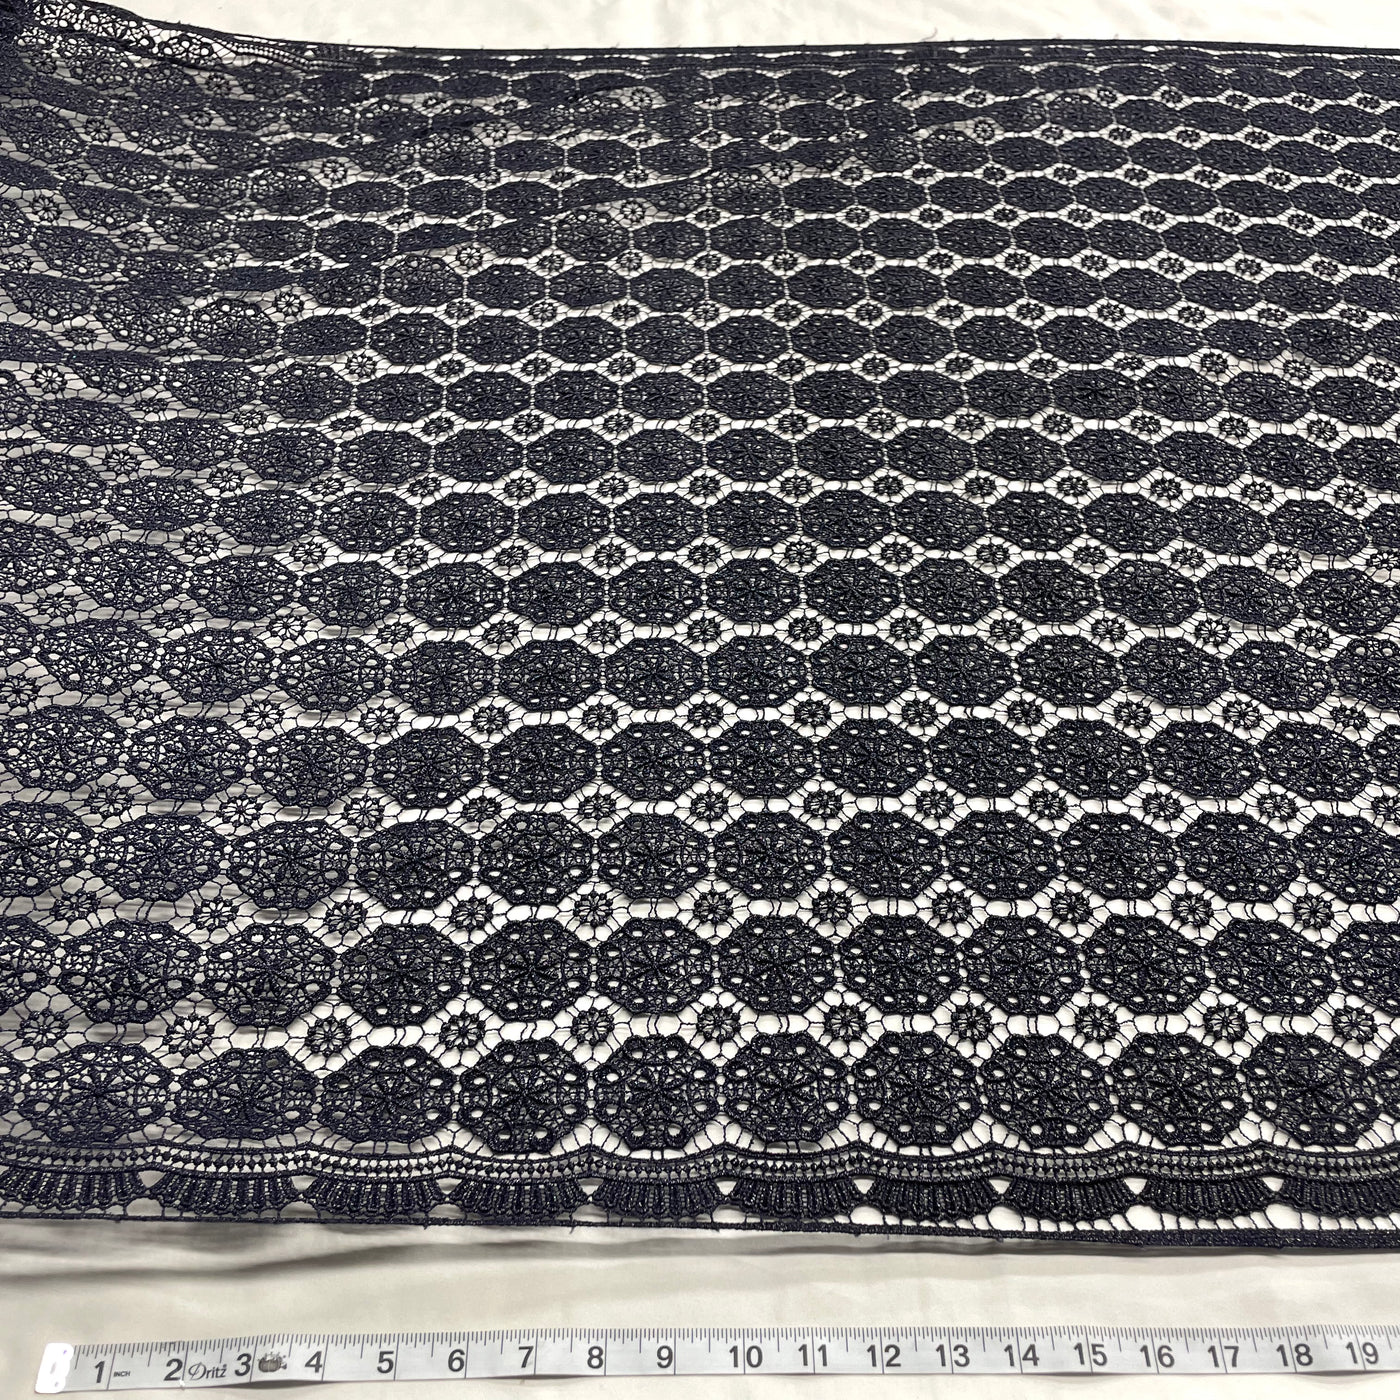 Floral Lace Fabric Embroidered on 100% Polyester Net Mesh | Lace USA